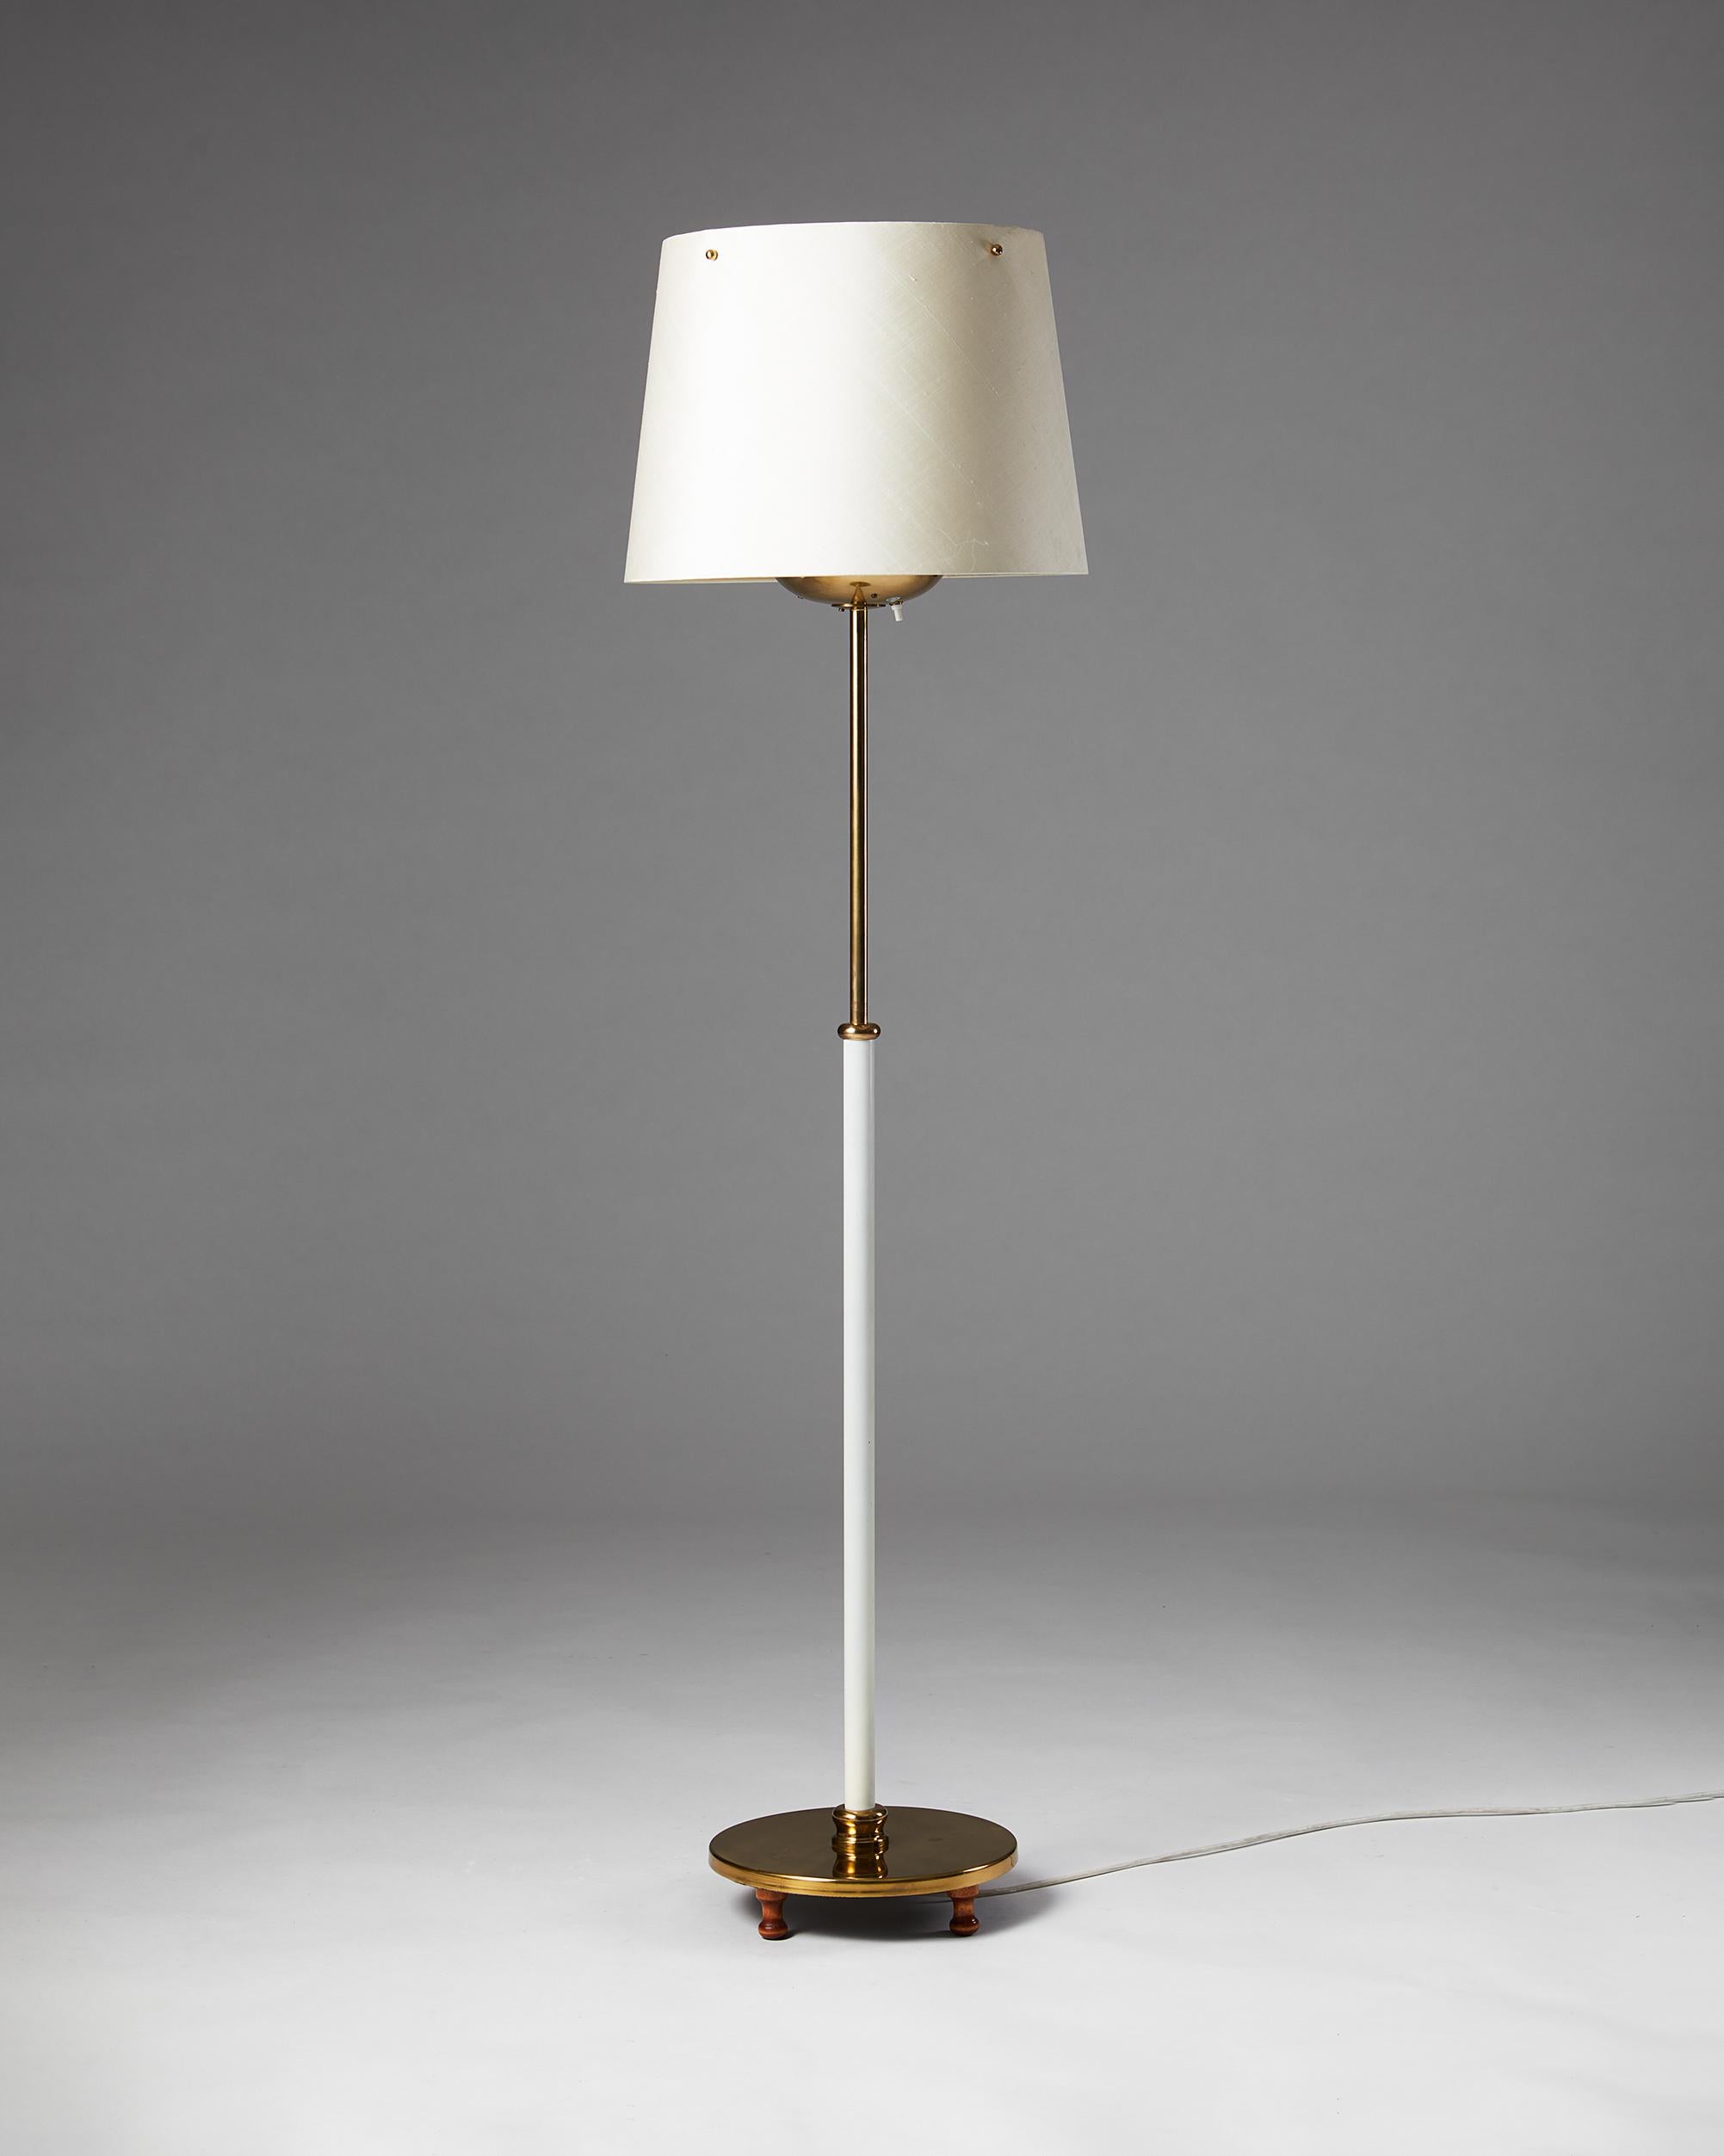 Floor lamp model 2564 designed by Josef Frank for Svenskt Tenn, 
Sweden, 1950s.

Polished and lacquered brass with textile shade.

Dimensions:
H: 151 cm
D: 36.5 cm
Base D: 28.5 cm

Josef Frank was a true European, he was also a pioneer of what would